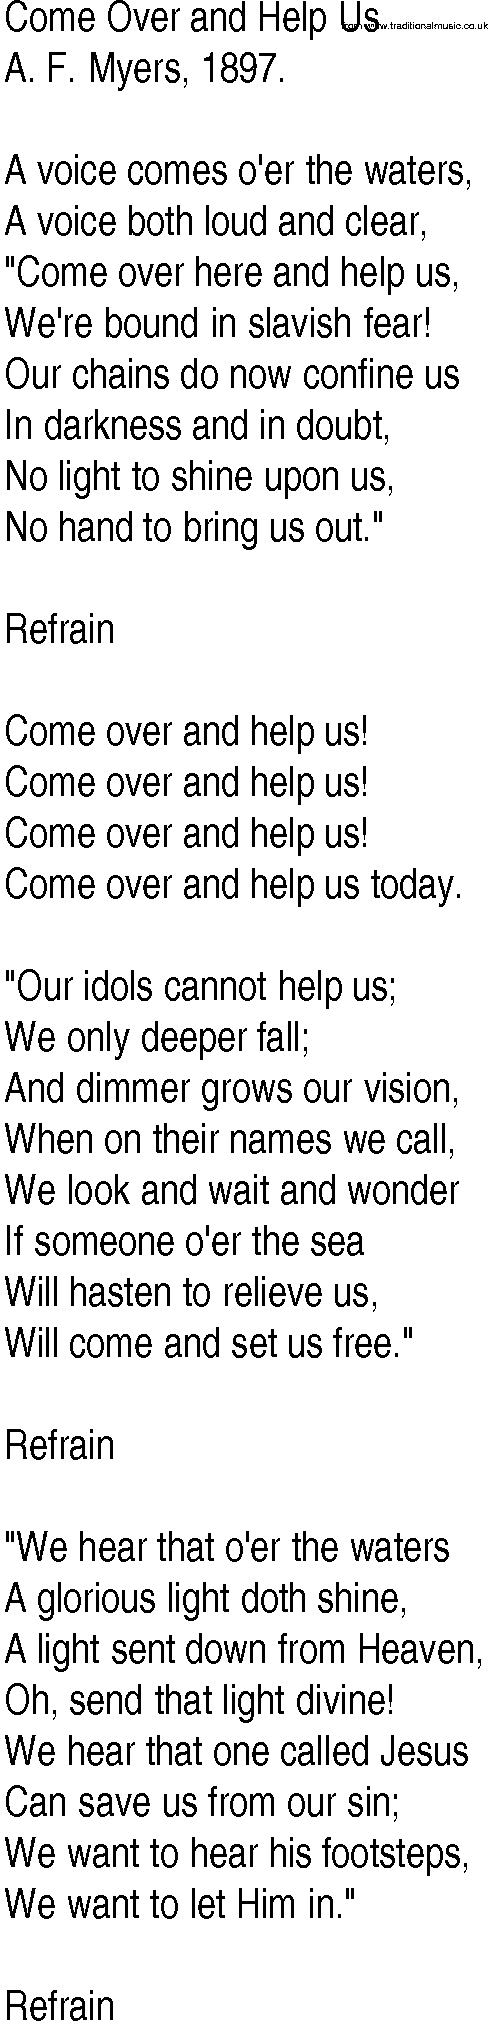 Hymn and Gospel Song: Come Over and Help Us by A F Myers lyrics